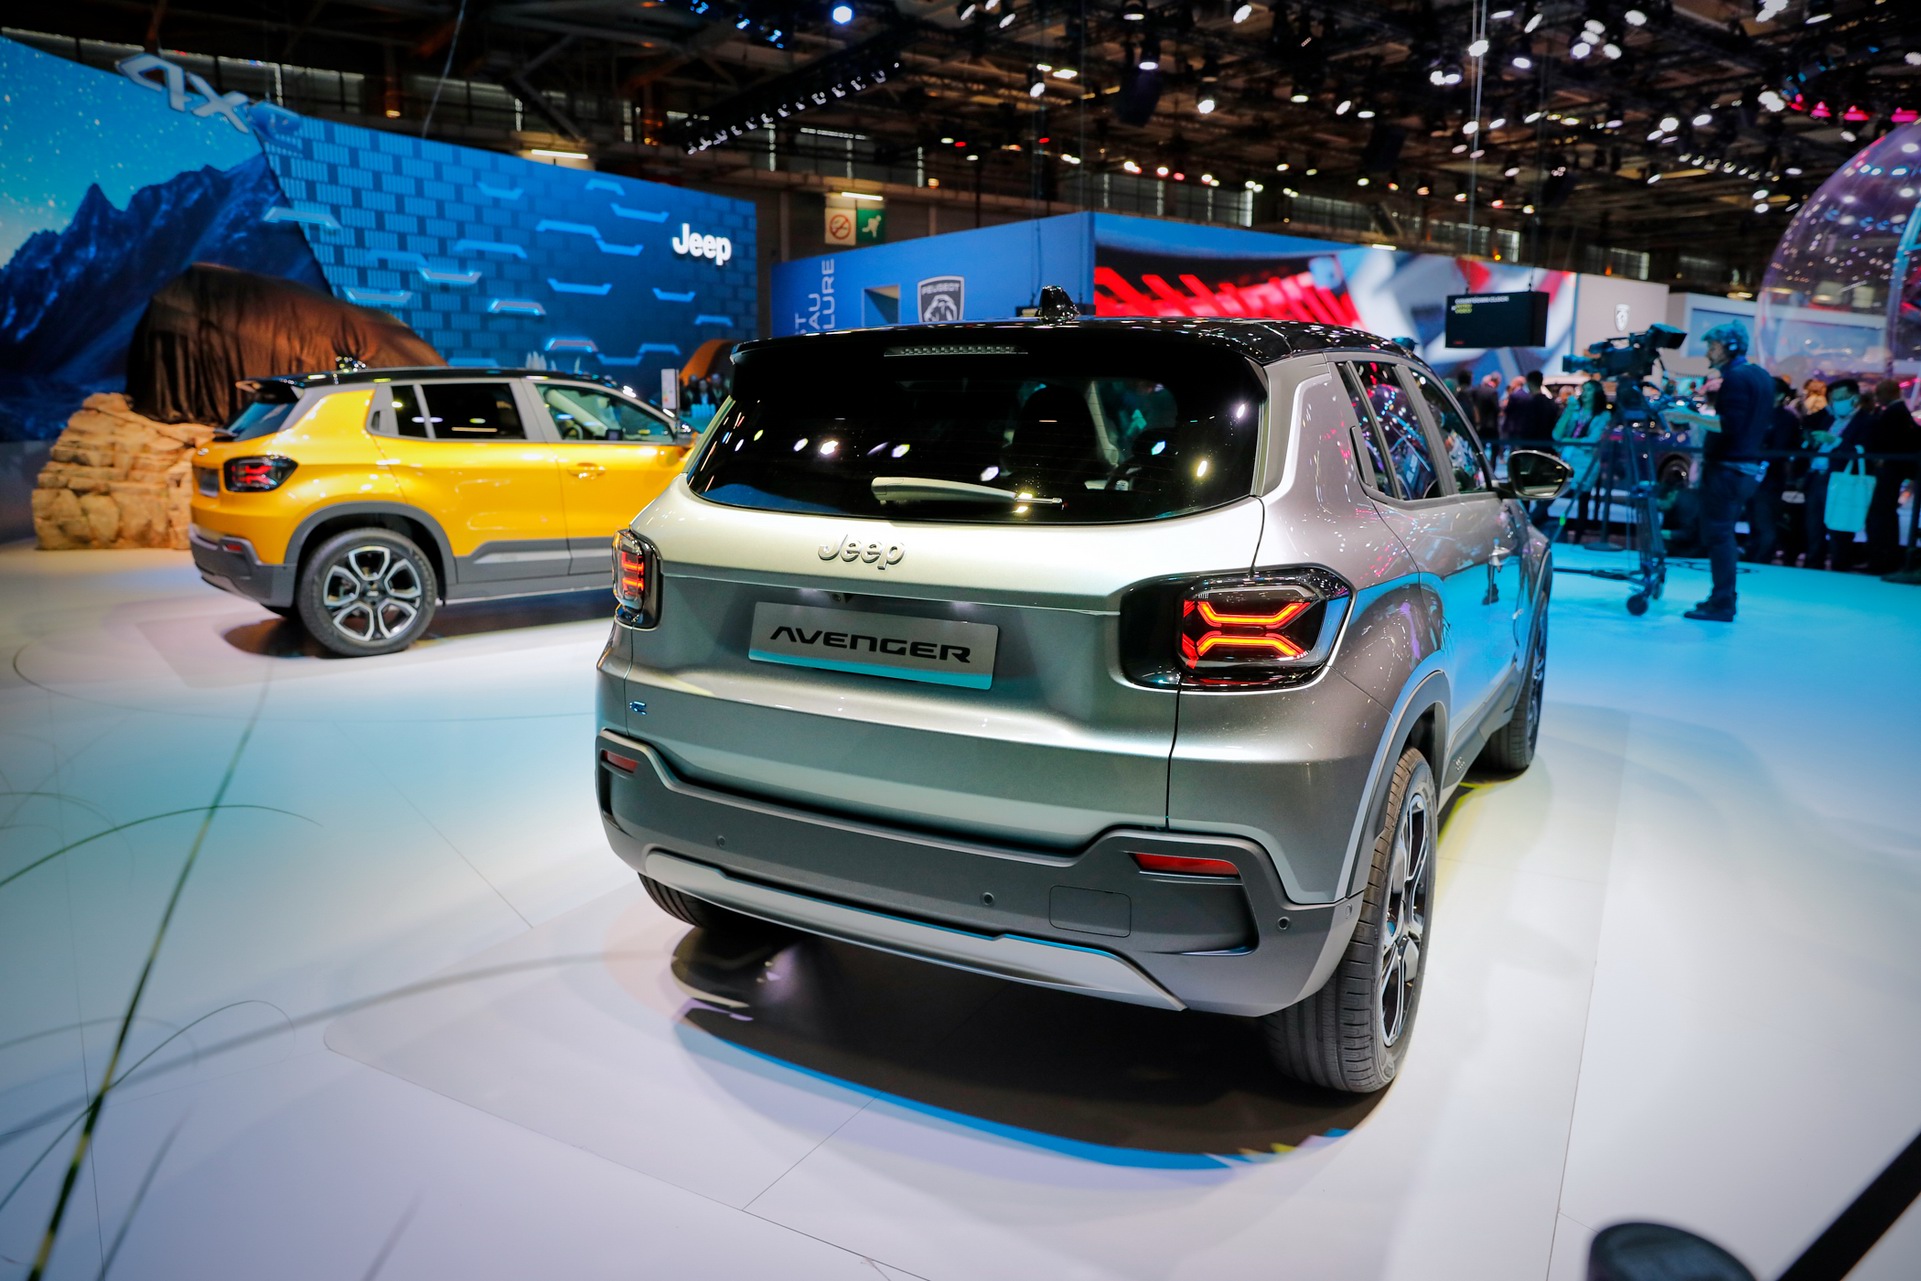 Jeep Avenger EV Coming to Europe in 2023 With 250 Miles of Range